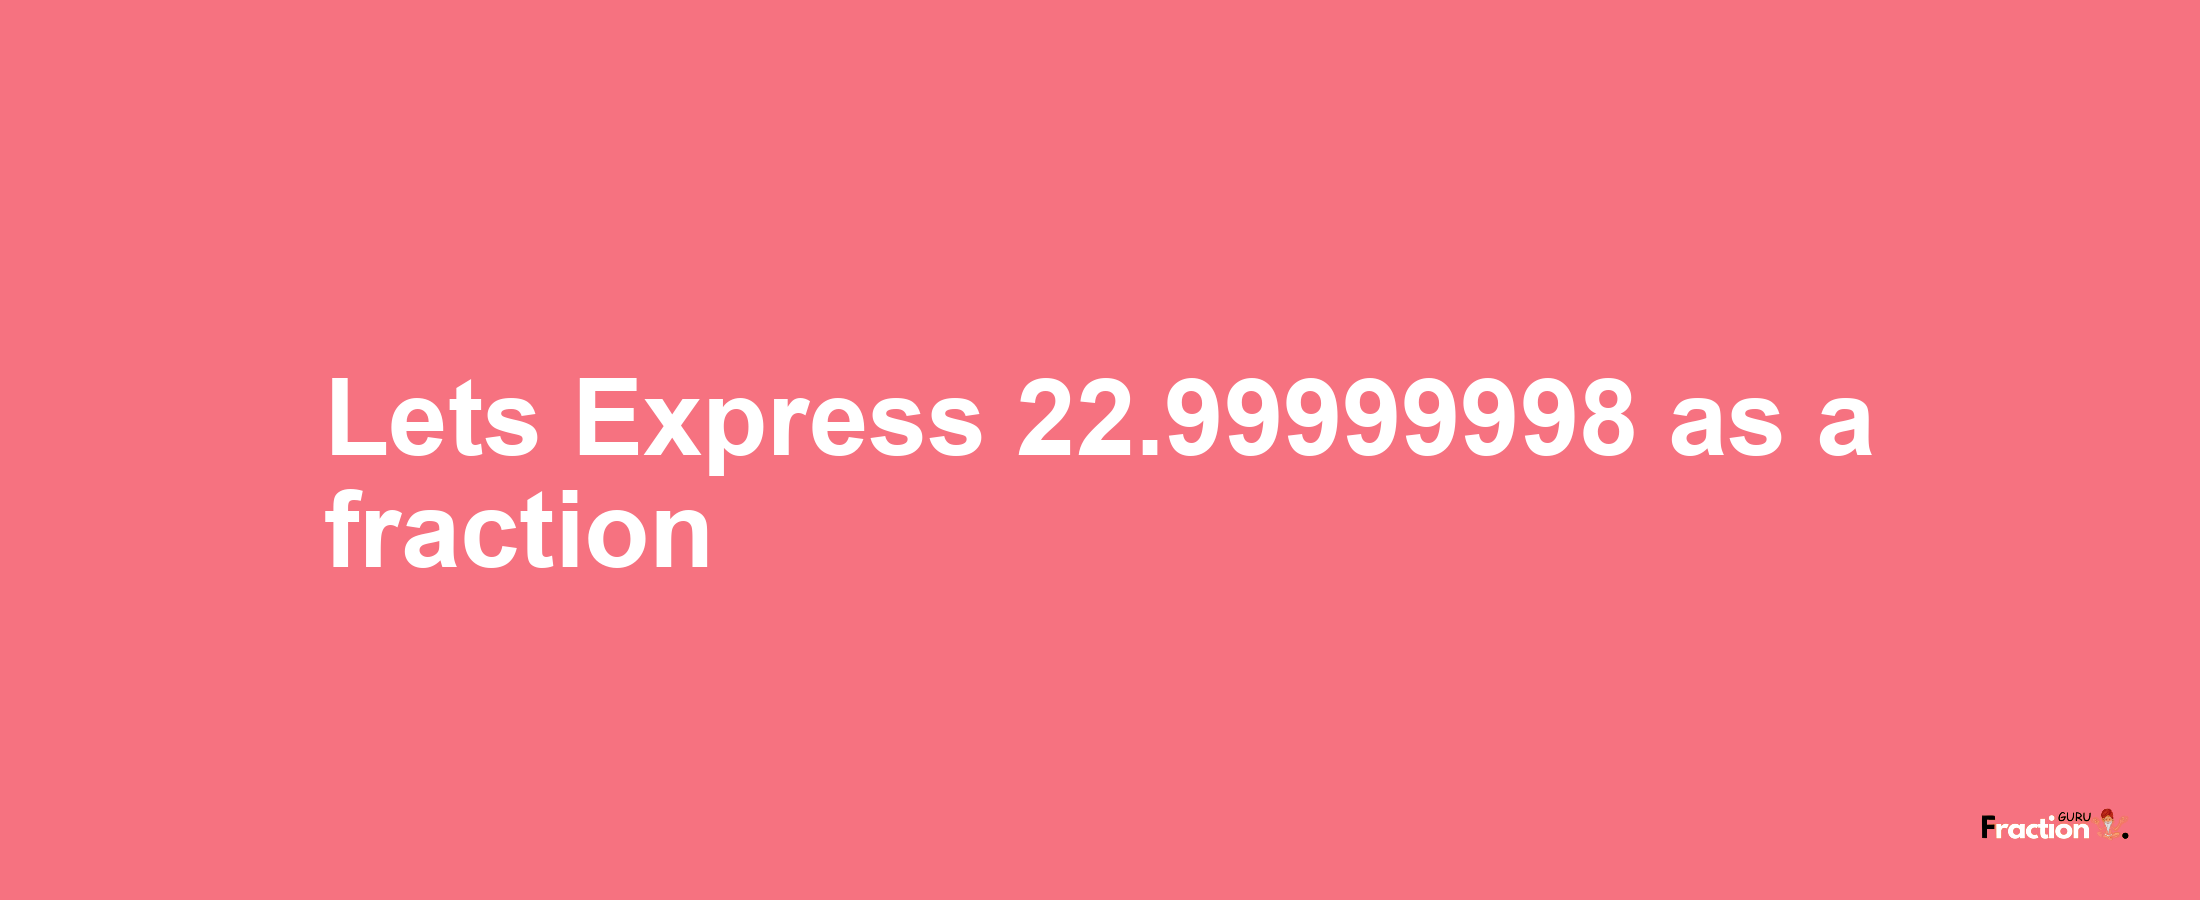 Lets Express 22.99999998 as afraction